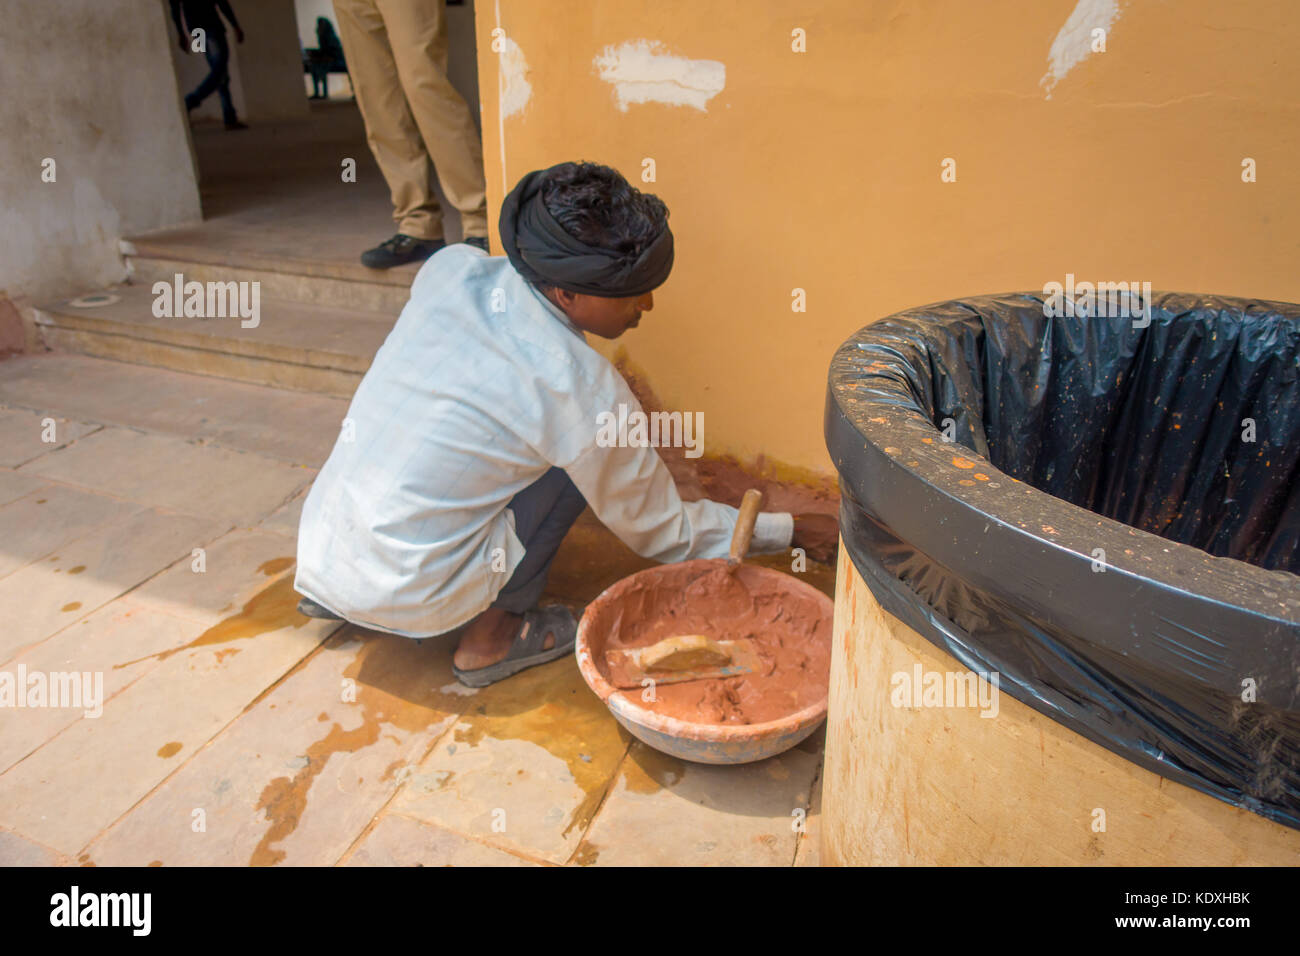 Amber, India - September 19, 2017: Unidentified Indian man wearing a white t-shirt and grey pants, working with clay fixing wall problems in the city of Amber, India Stock Photo